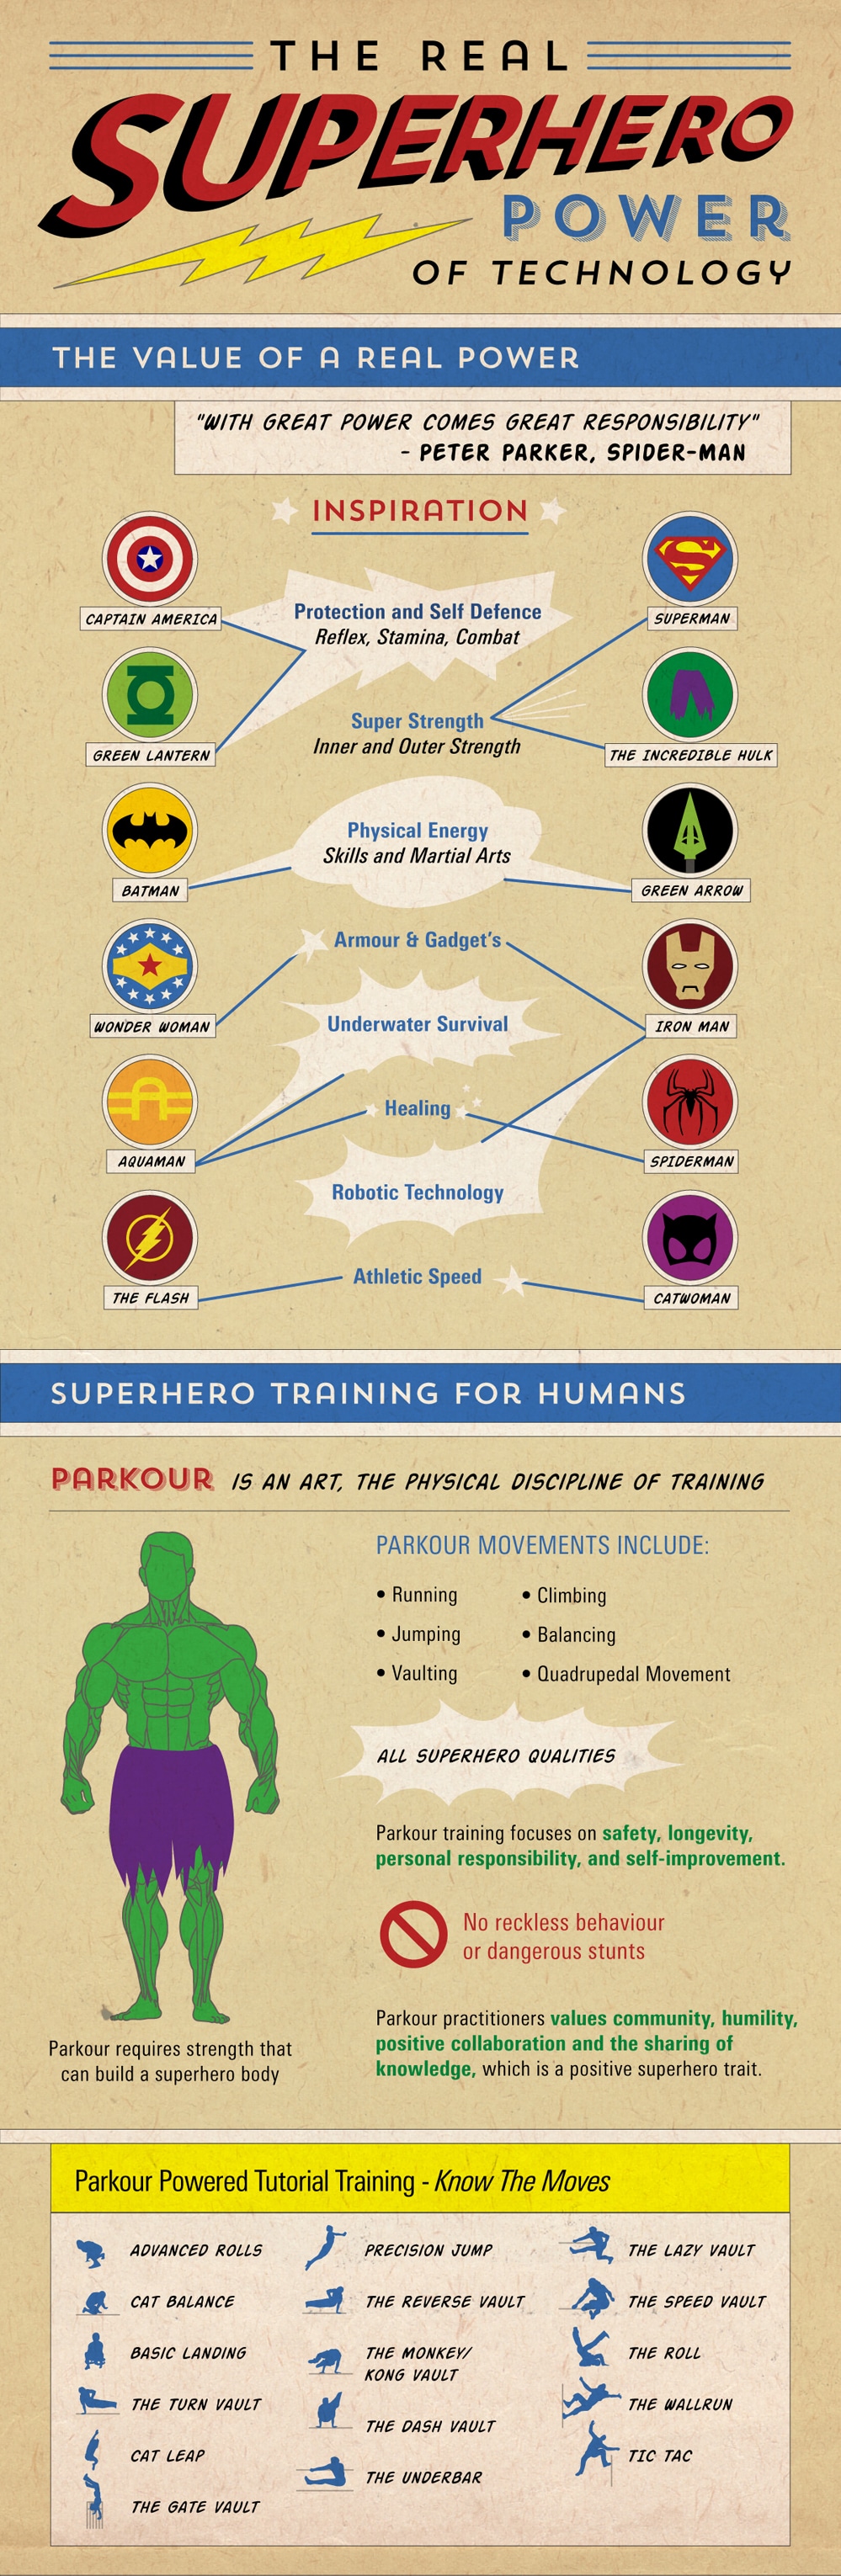 Current Technologies That Could Build Real Superheroes [Infographic]